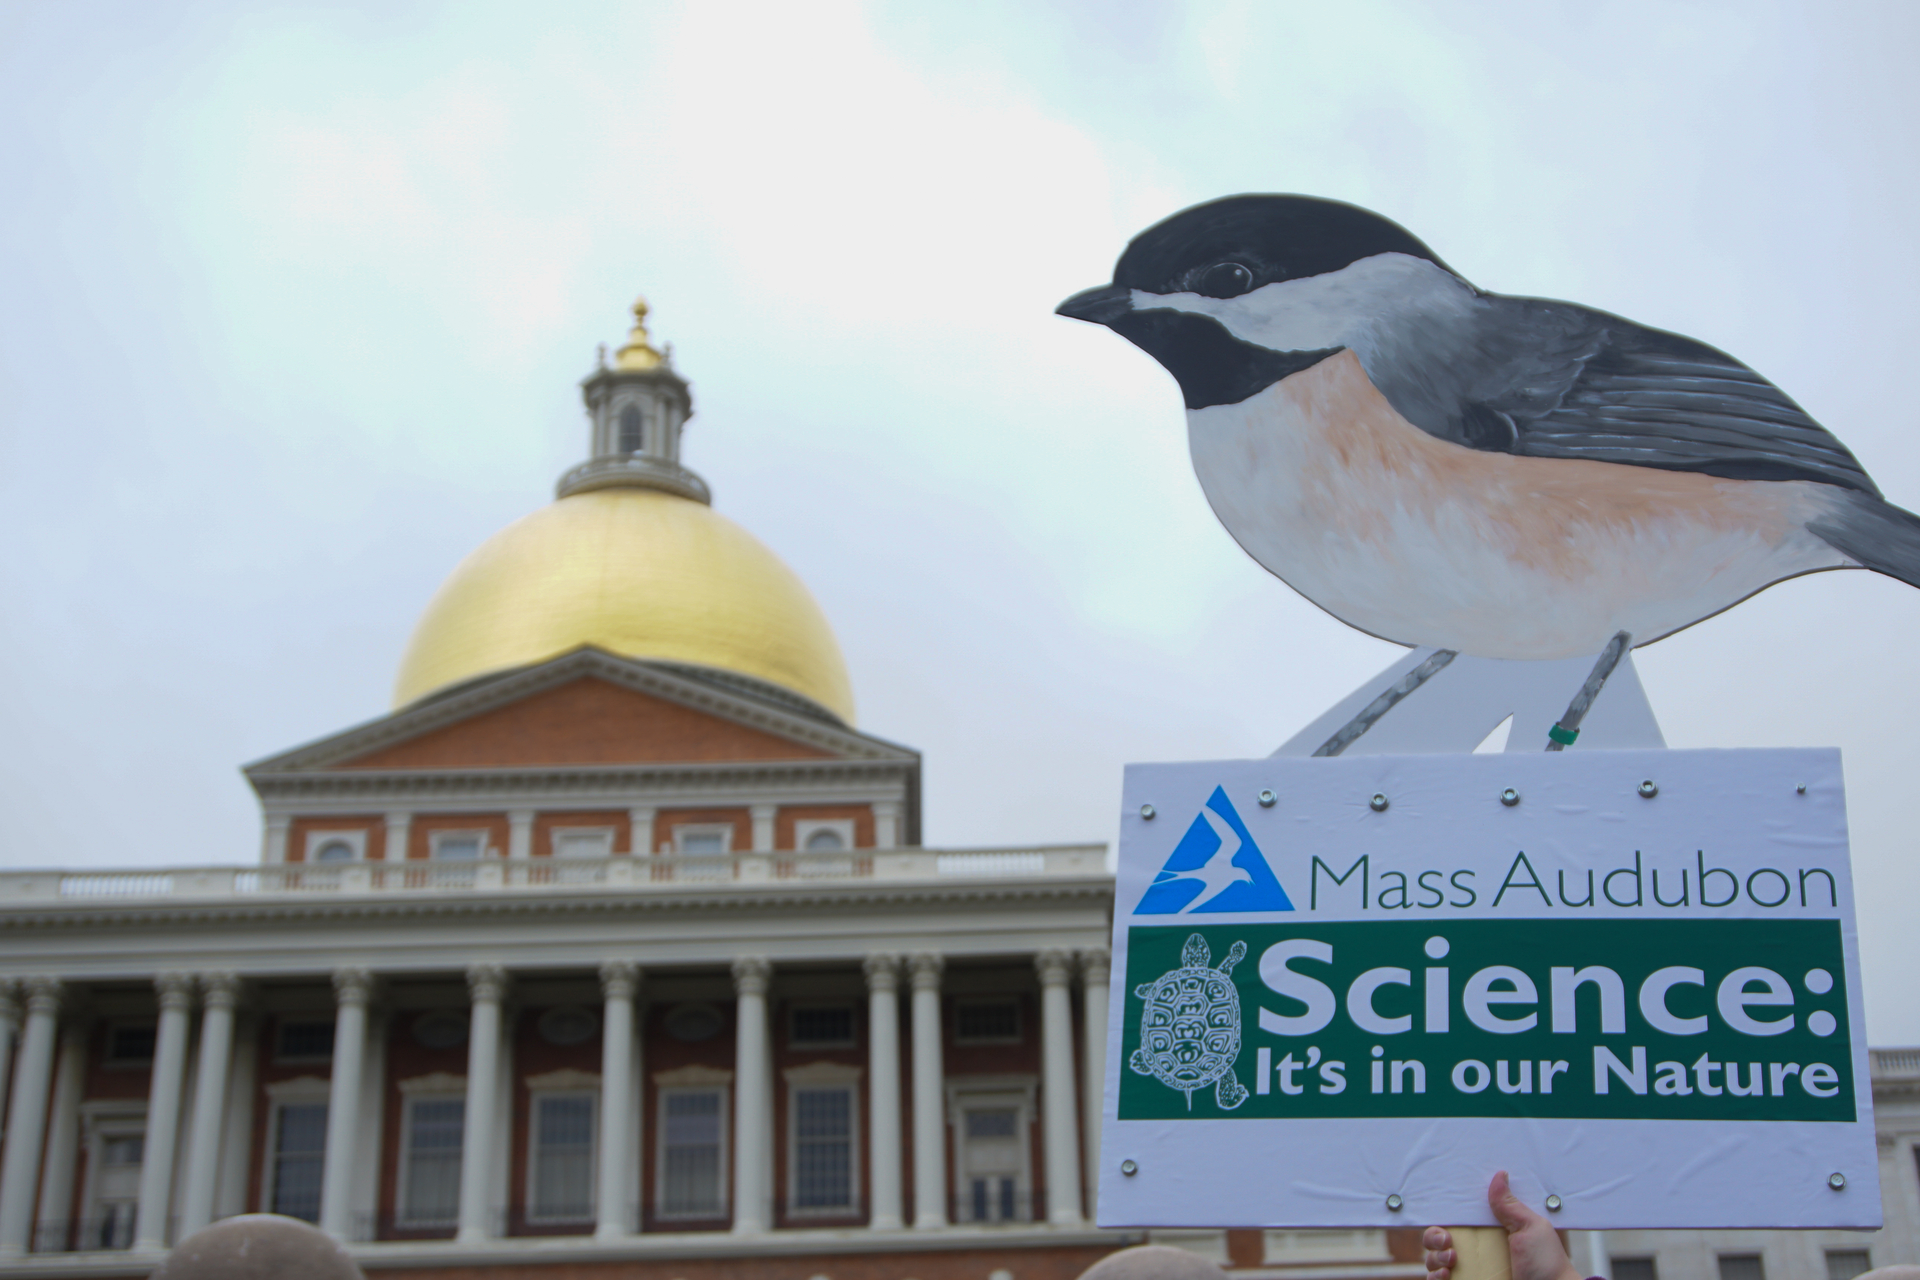 State house in the background with a sign that says, "Mass Audubon, Science: It's in our Nature"